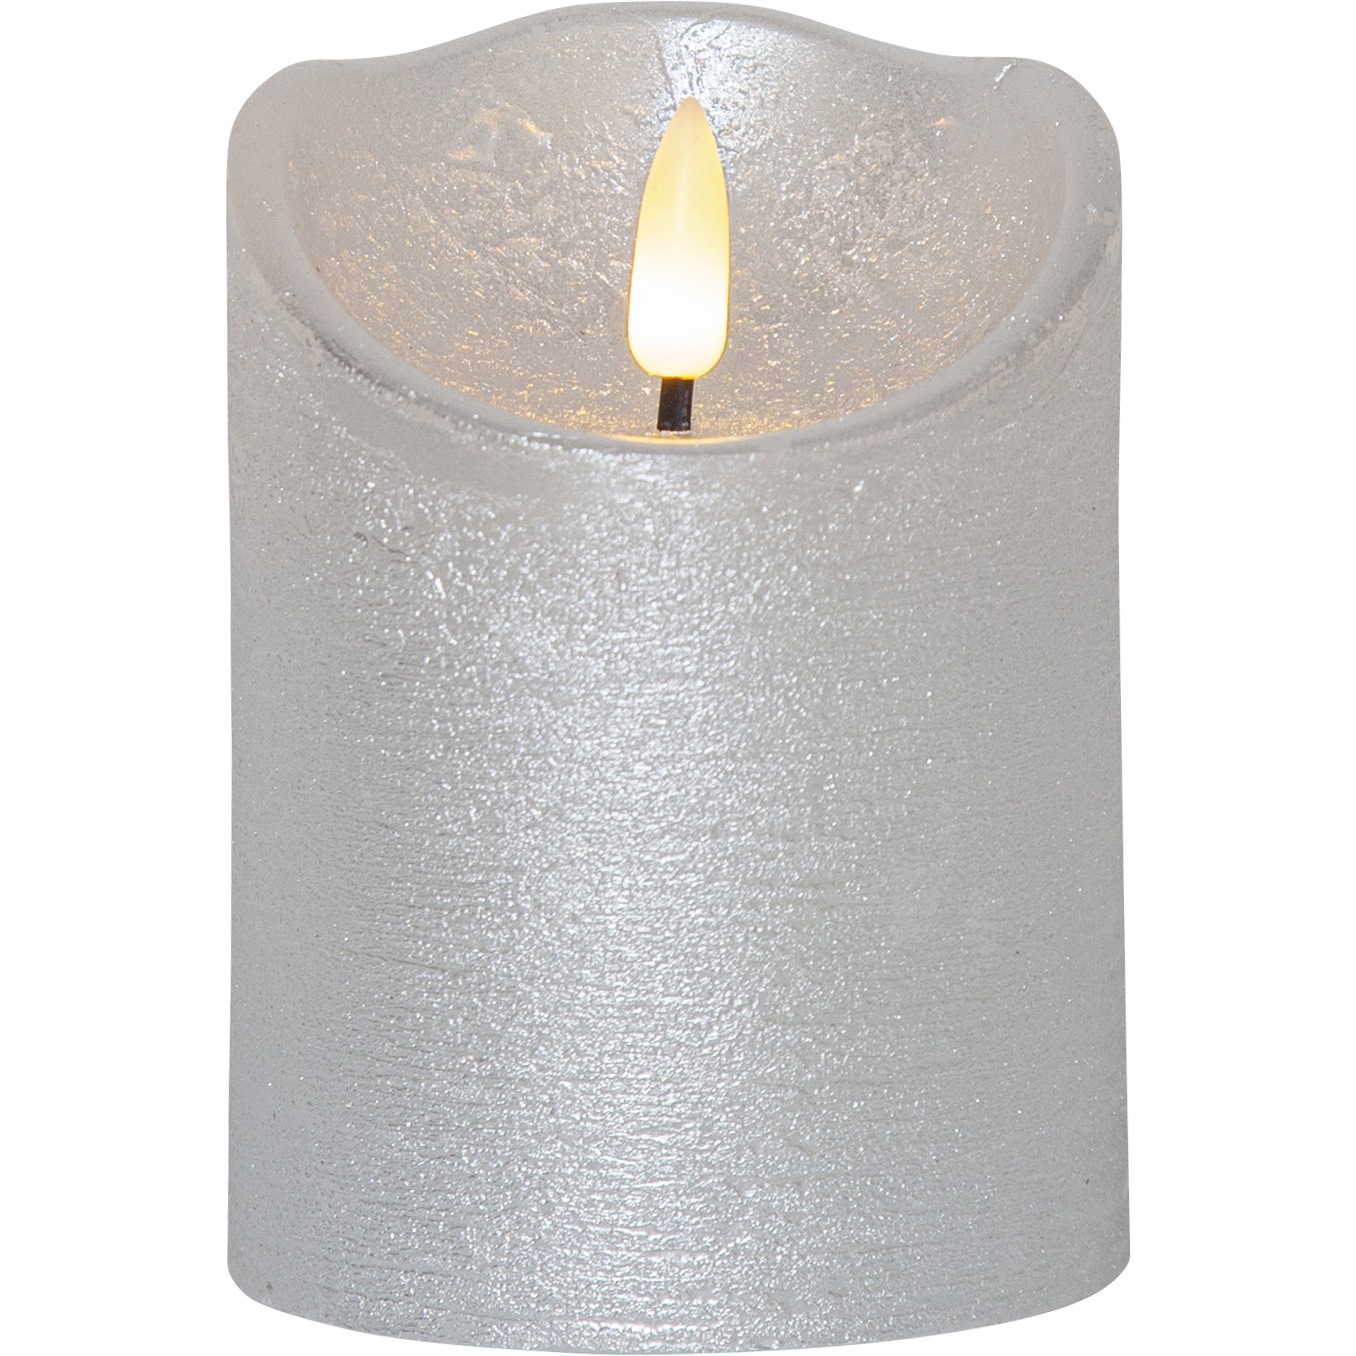 Flamme Rustic LED Kubbelys Silver, 10 cm